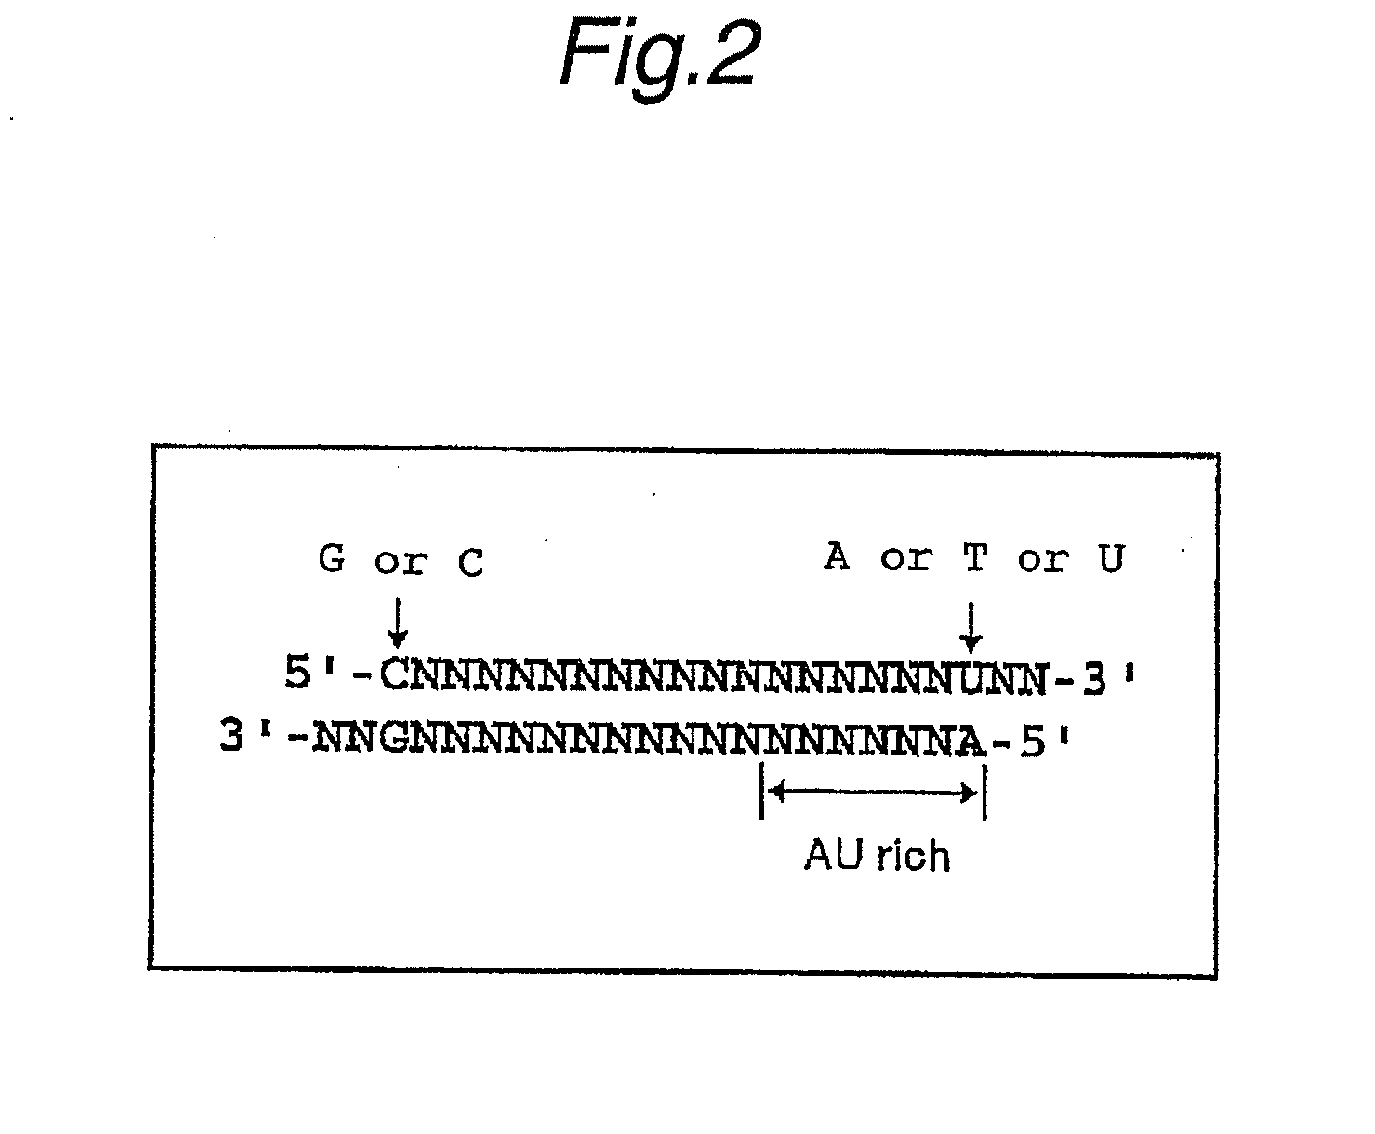 Method For Searching Target Base Sequence Of Rna Interference, Method For Designing Base Sequence Of Polynucleotide For Causing Rna Interference, Method For Producing Double-Stranded Polynucleotide, Method For Inhibiting Gene Expression, Base Sequence Processing Apparatus, Program For Running Base Sequence Processing Method On Computer, Recording Medium, And Base Sequence Processing System